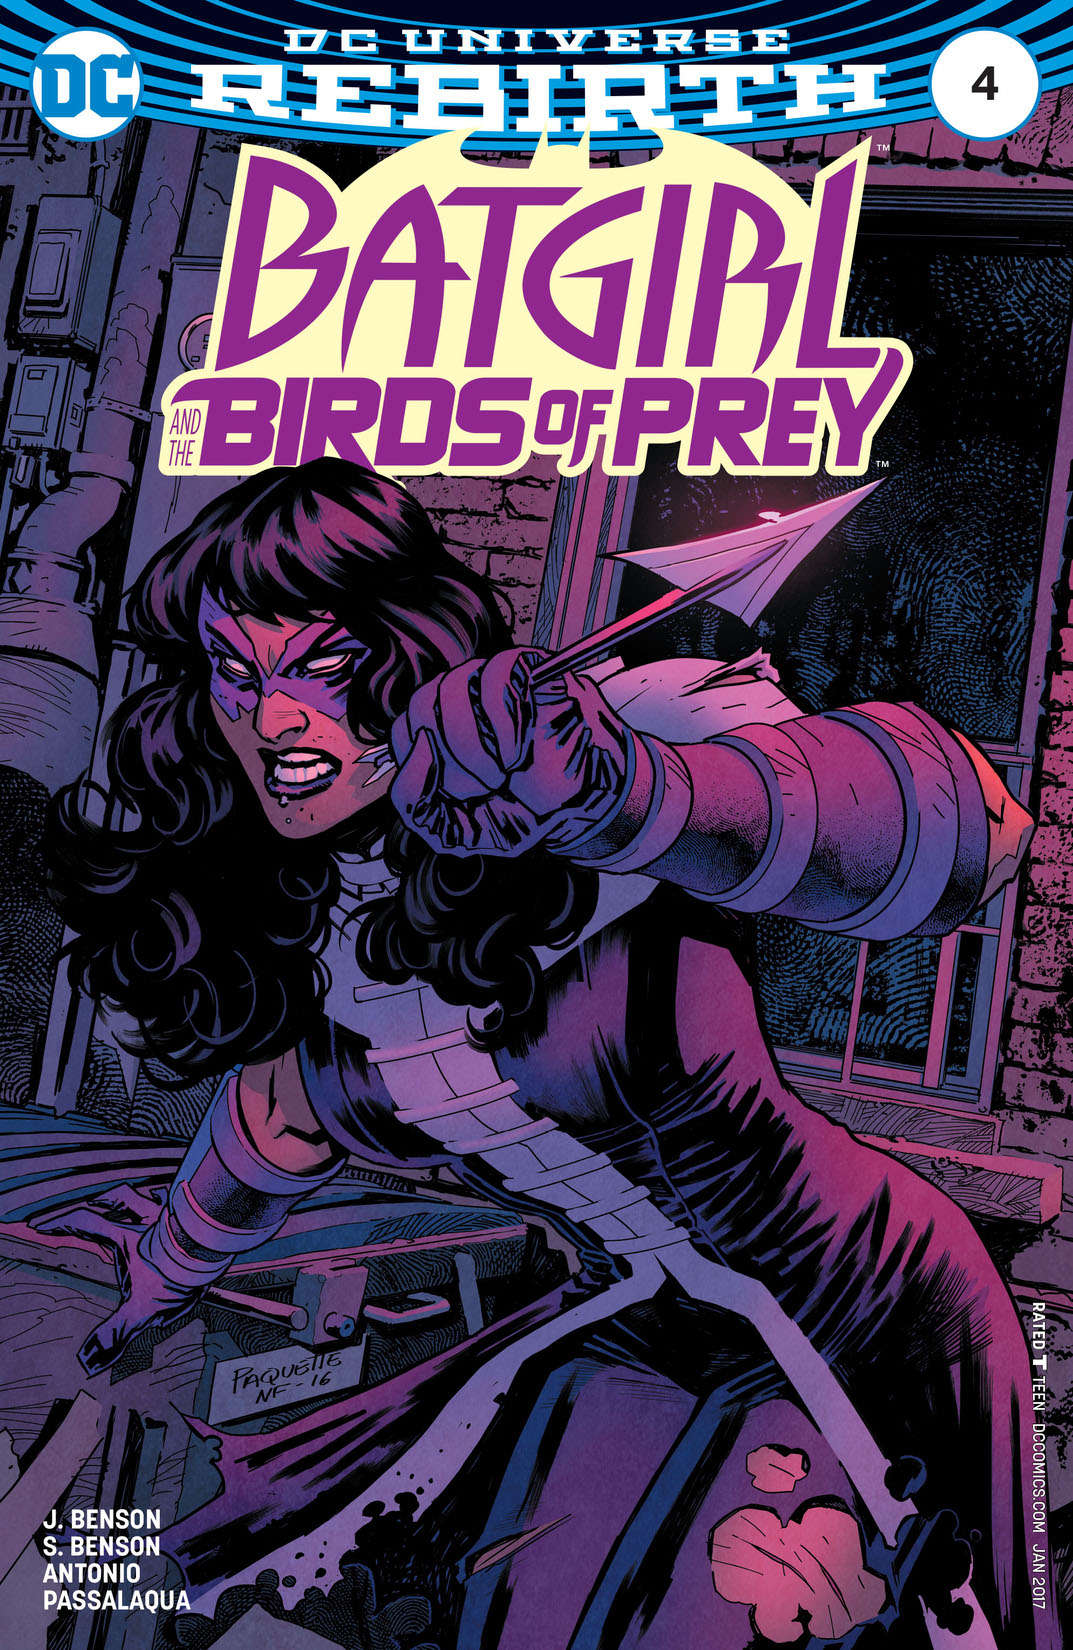 Batgirl and the Birds of Prey #4 preview images